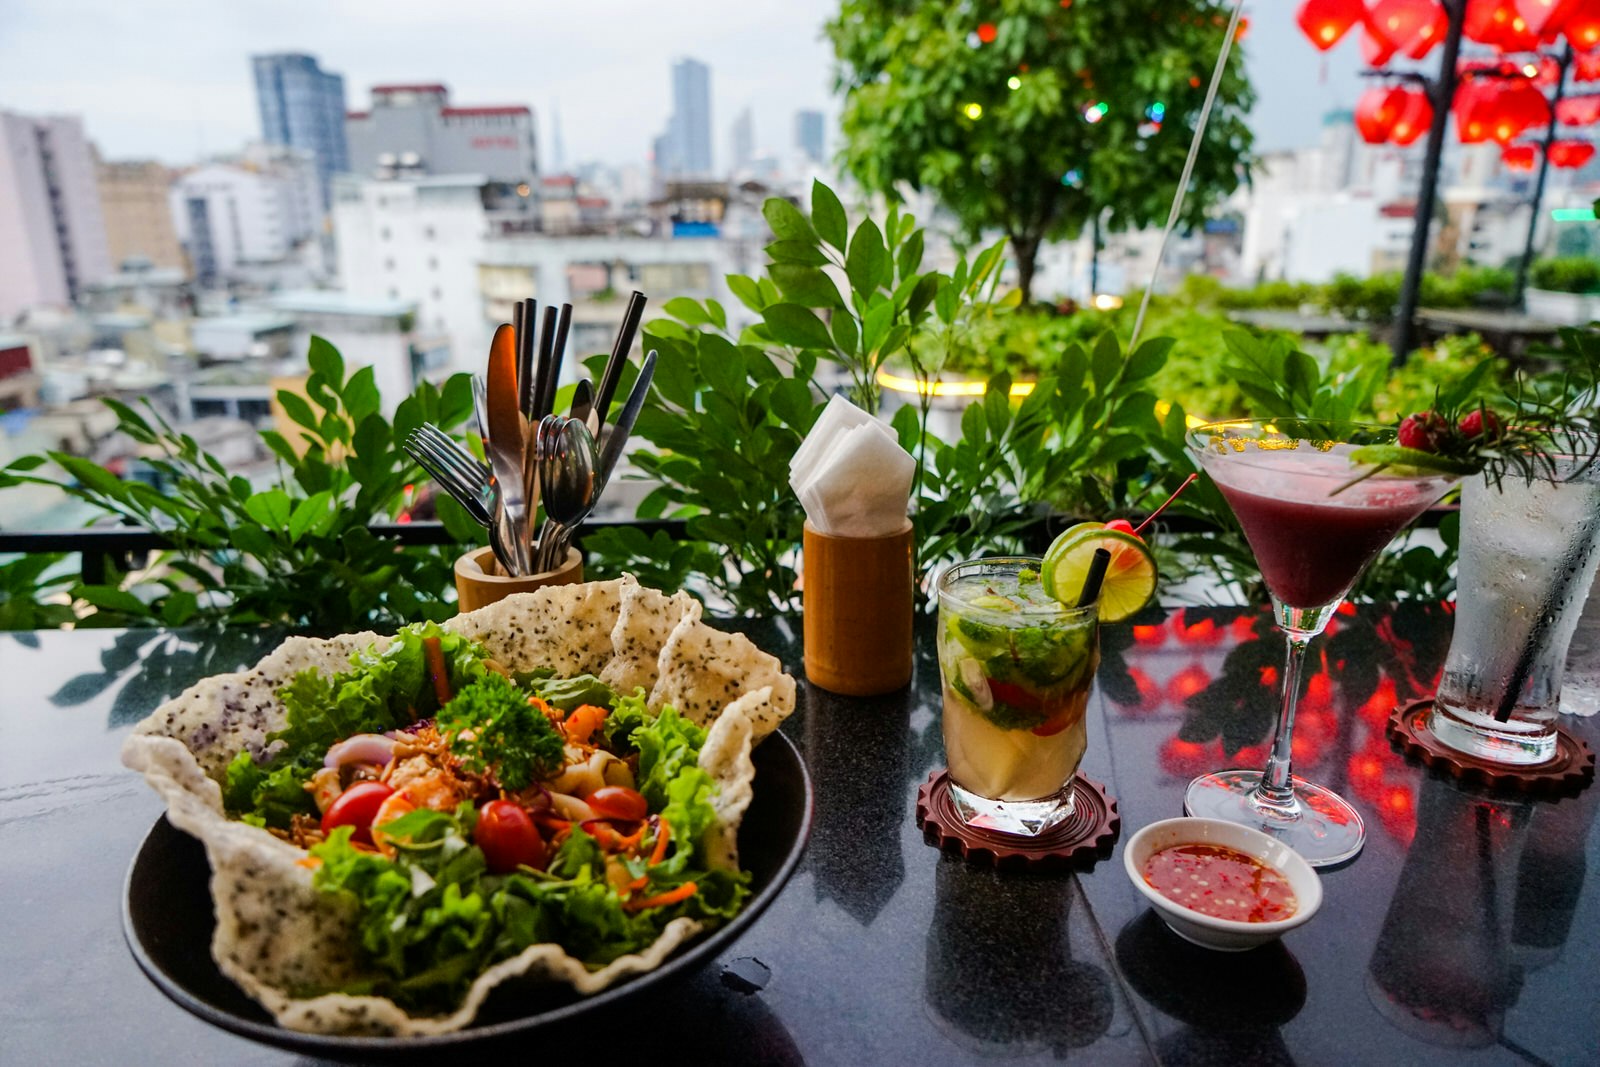 A salad and a cocktail at the View. The leafy, green salad is in an edible chip bowl. 